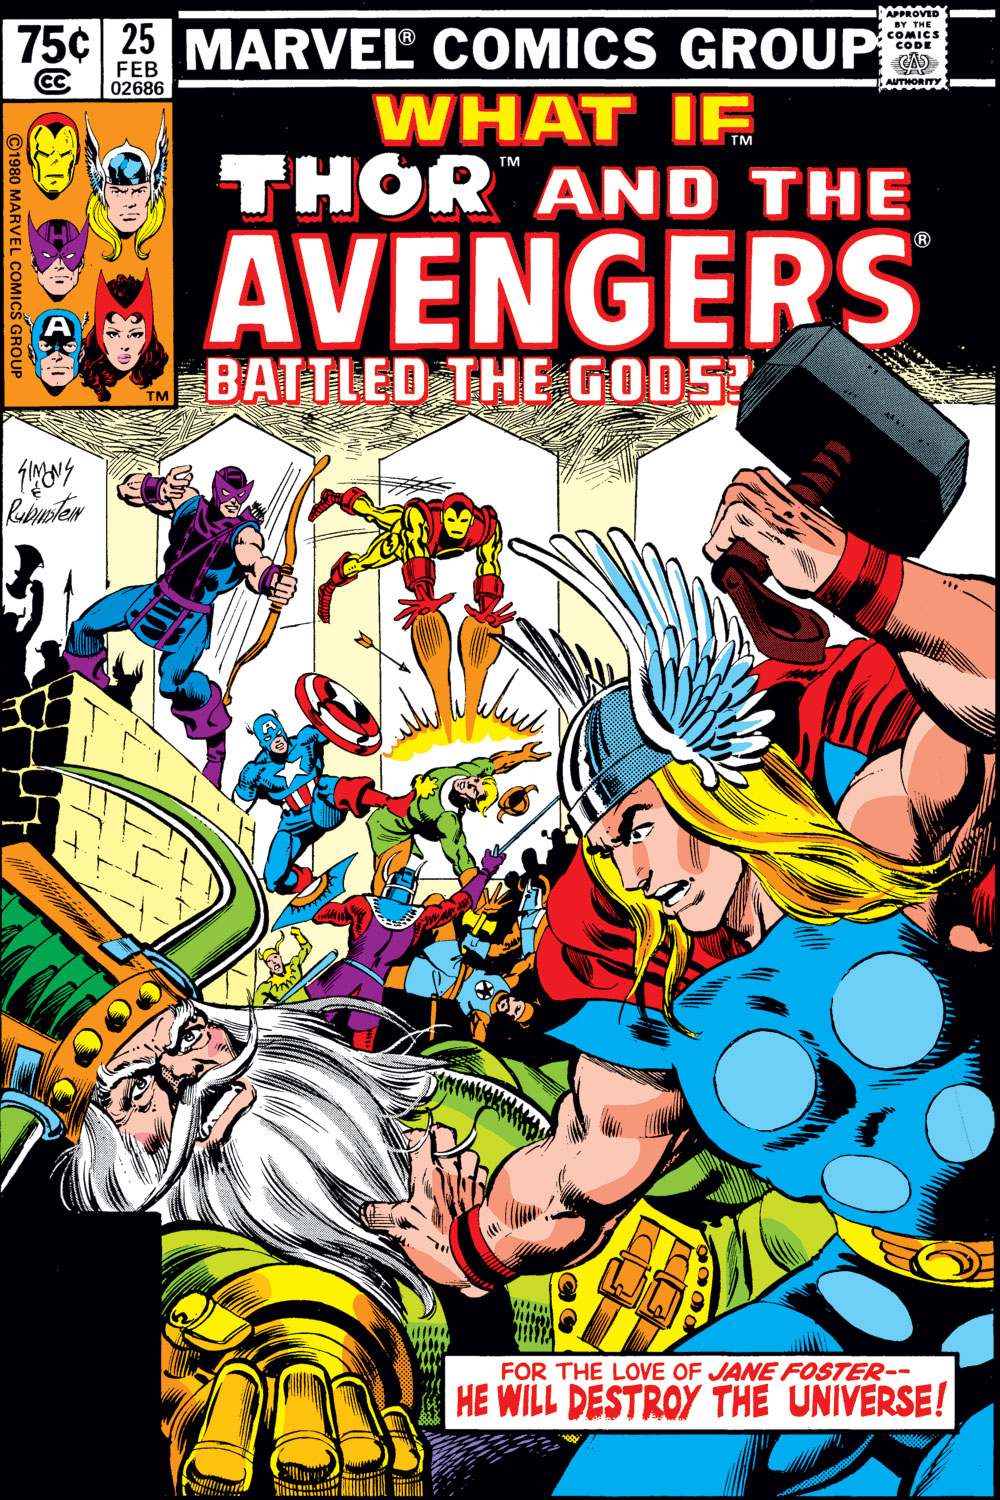 What If? (1977) Issue #25 - Thor and the Avengers battled the gods #25 - English 1